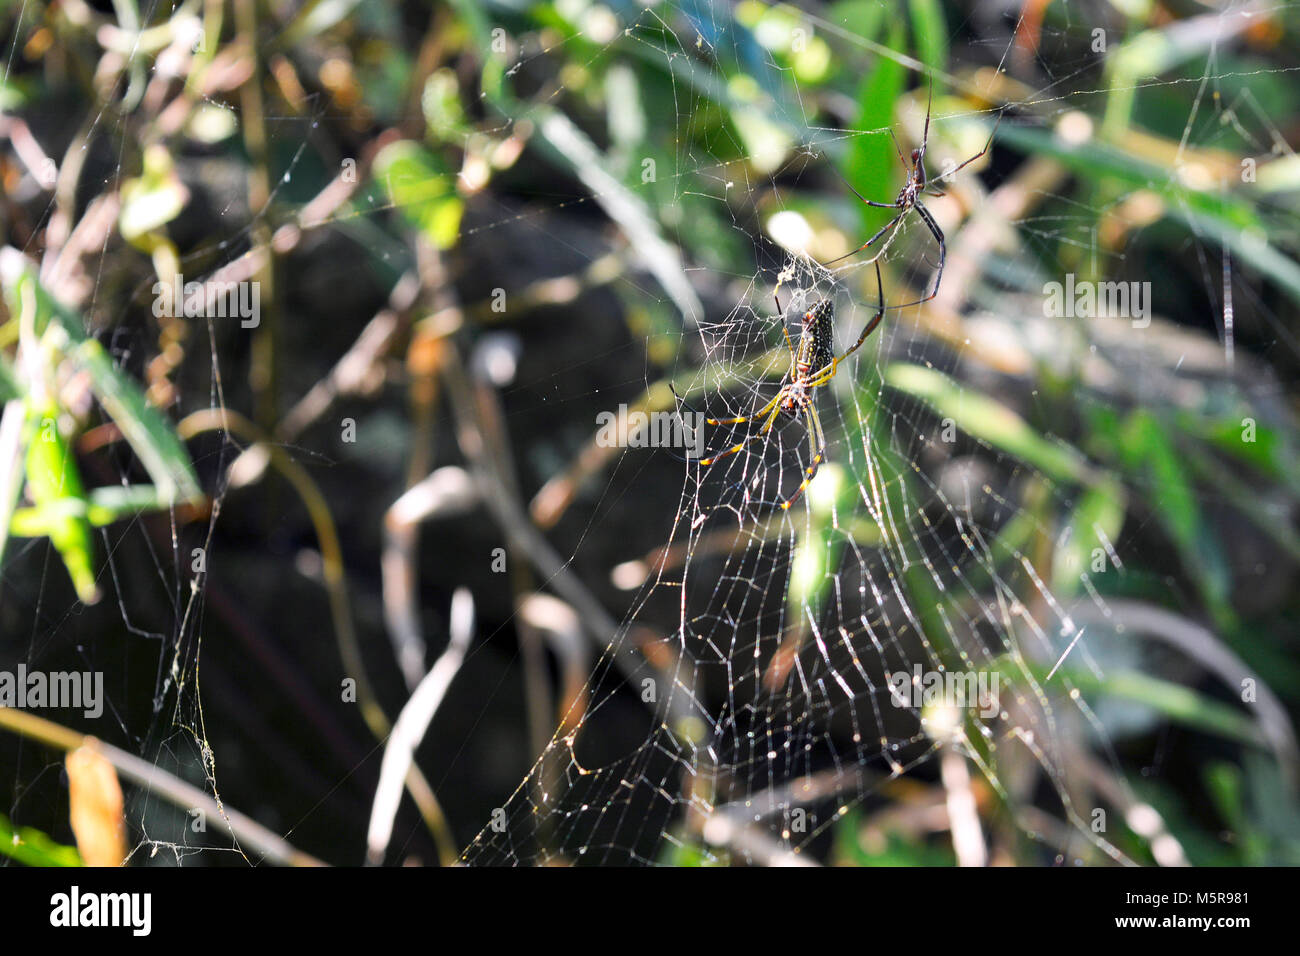 Spiders hanging on the web waiting for prey Stock Photo